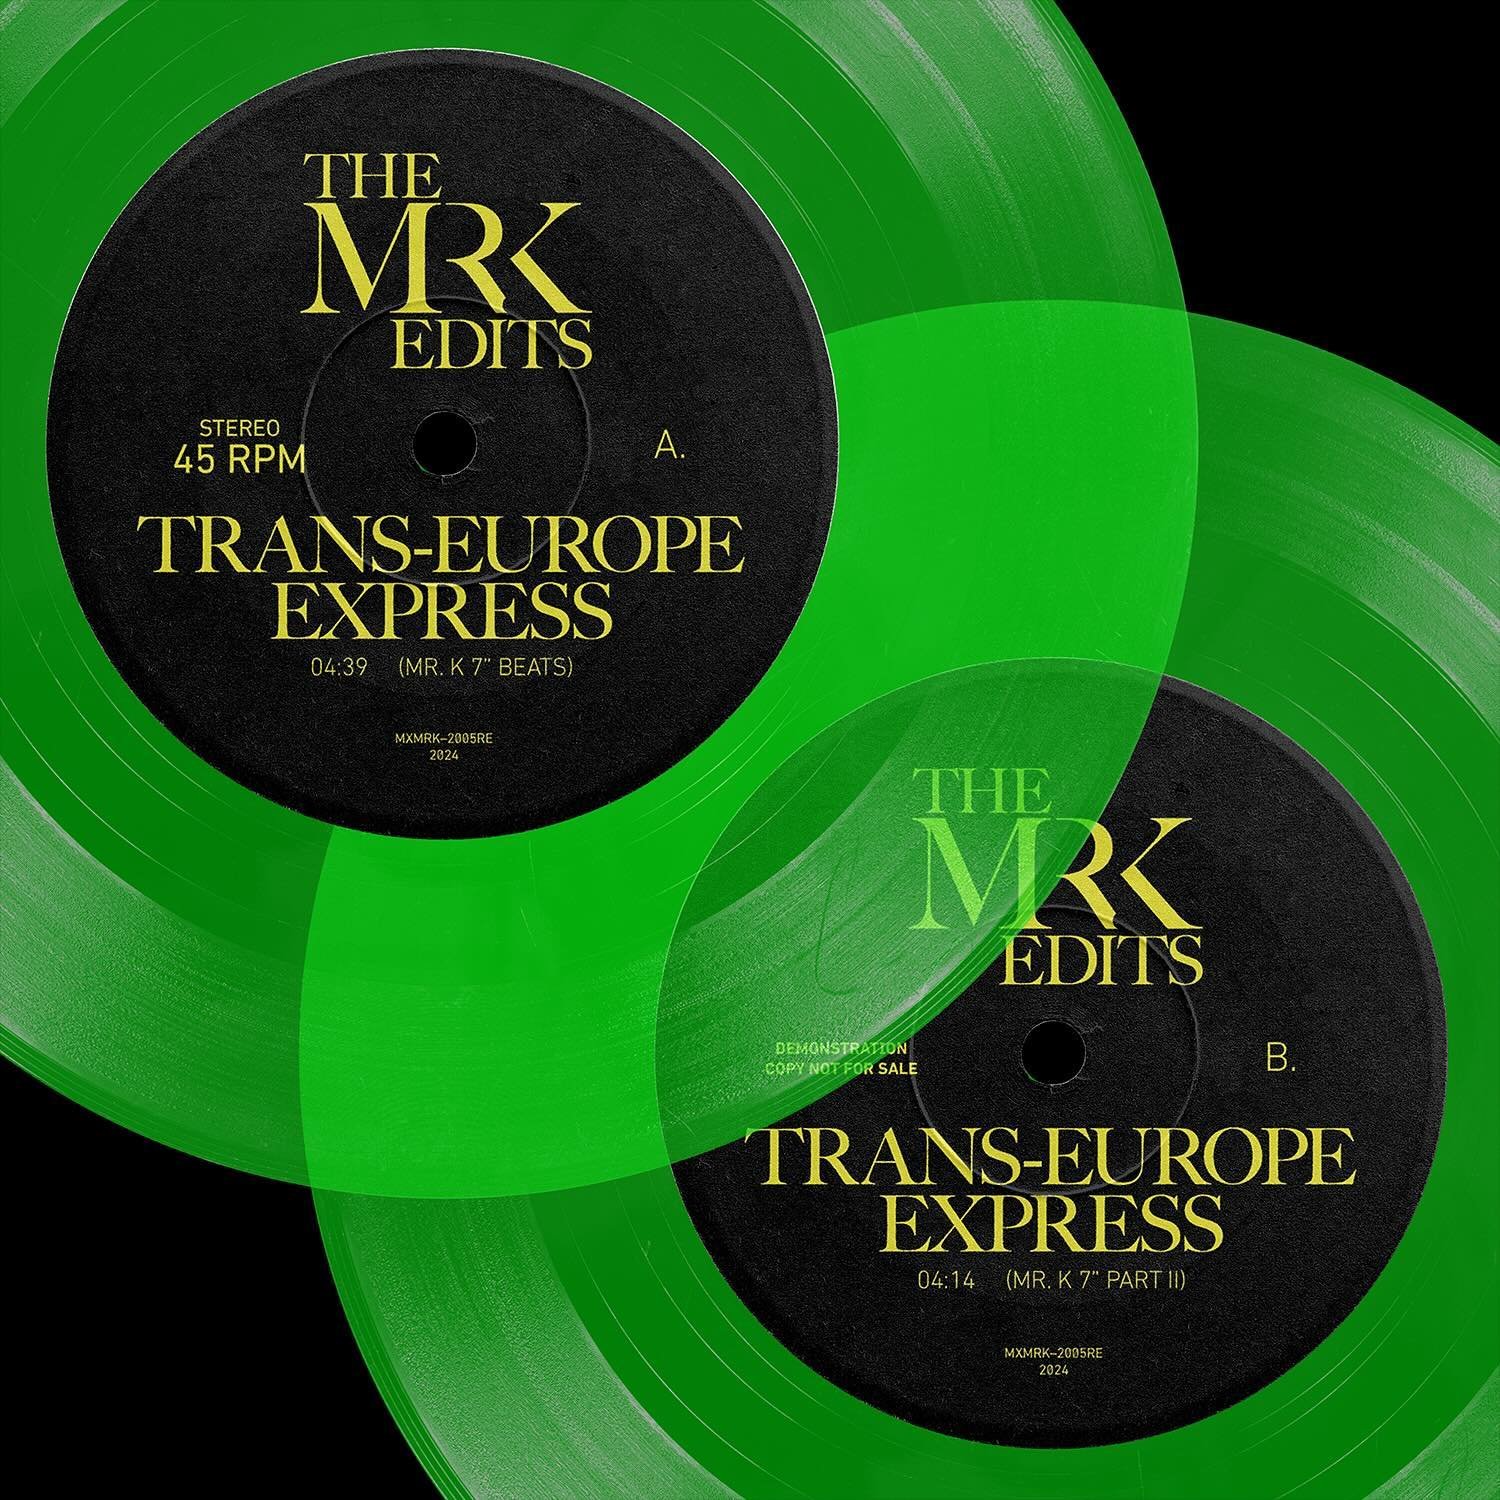 Out TODAY... Record Store Day, Saturday April 20, 2024! 
Danny :)
(RSD &lsquo;24 Release) &ldquo;Trans-Europe Express&rdquo; 

A. &ldquo;Trans-Europe Express&rdquo; (Mr K 7&rdquo; Beats) (4:38)
B. &ldquo;Trans-Europe Express&rdquo; (Mr K 7&rdquo; Par